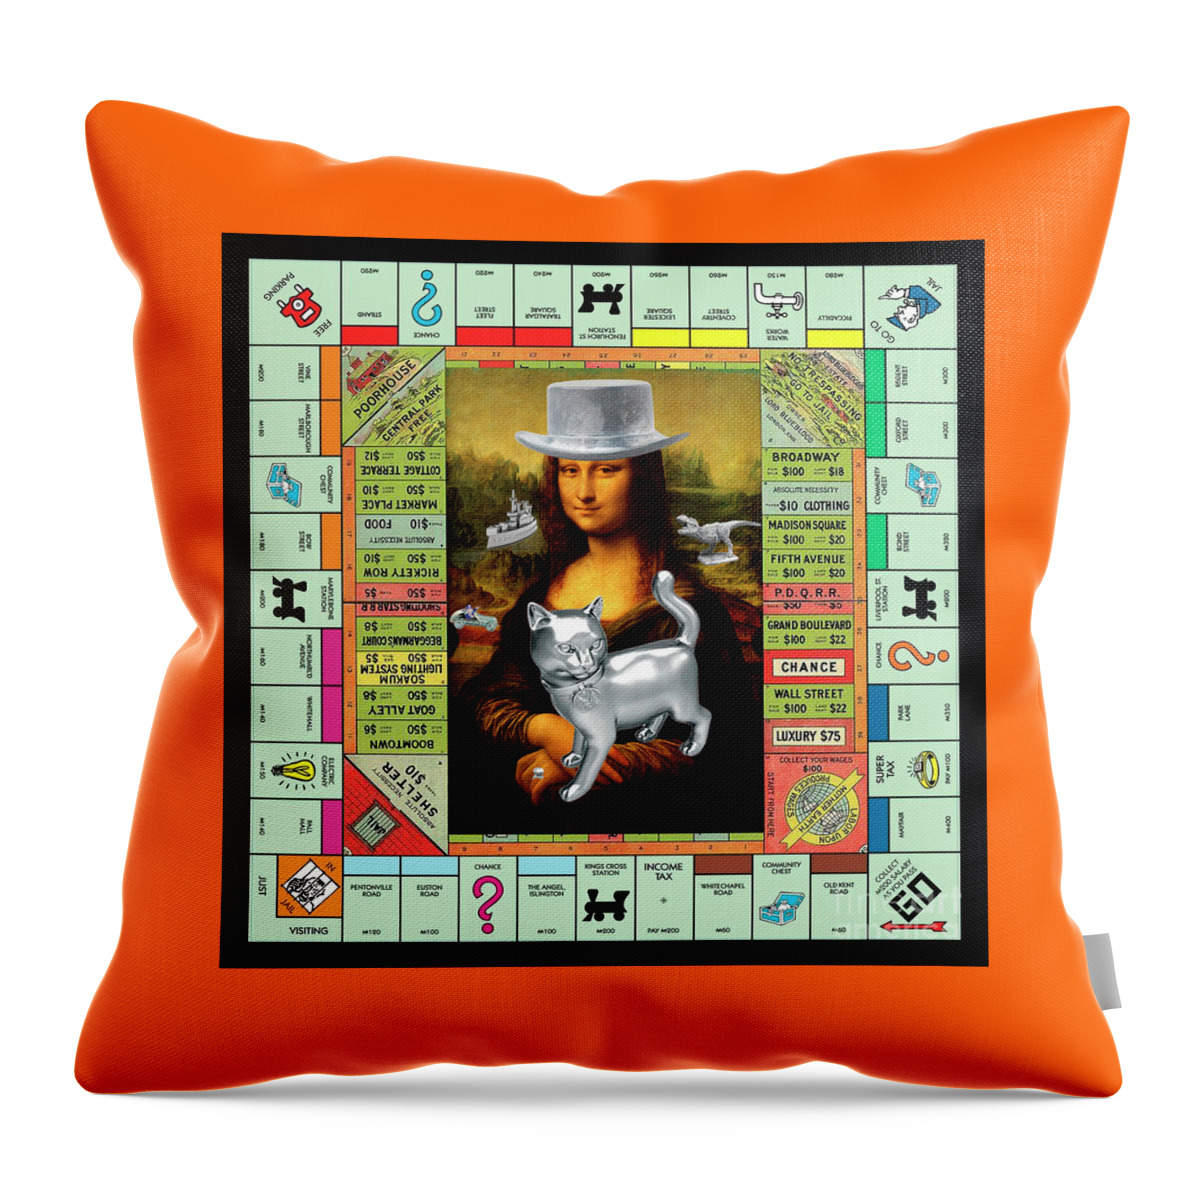 Mona Lisa Throw Pillow featuring the mixed media Monopolisa - Mixed Media Pop Art Collage of Mona Lisa on Old Monopoly Gameboard by Steven Shaver